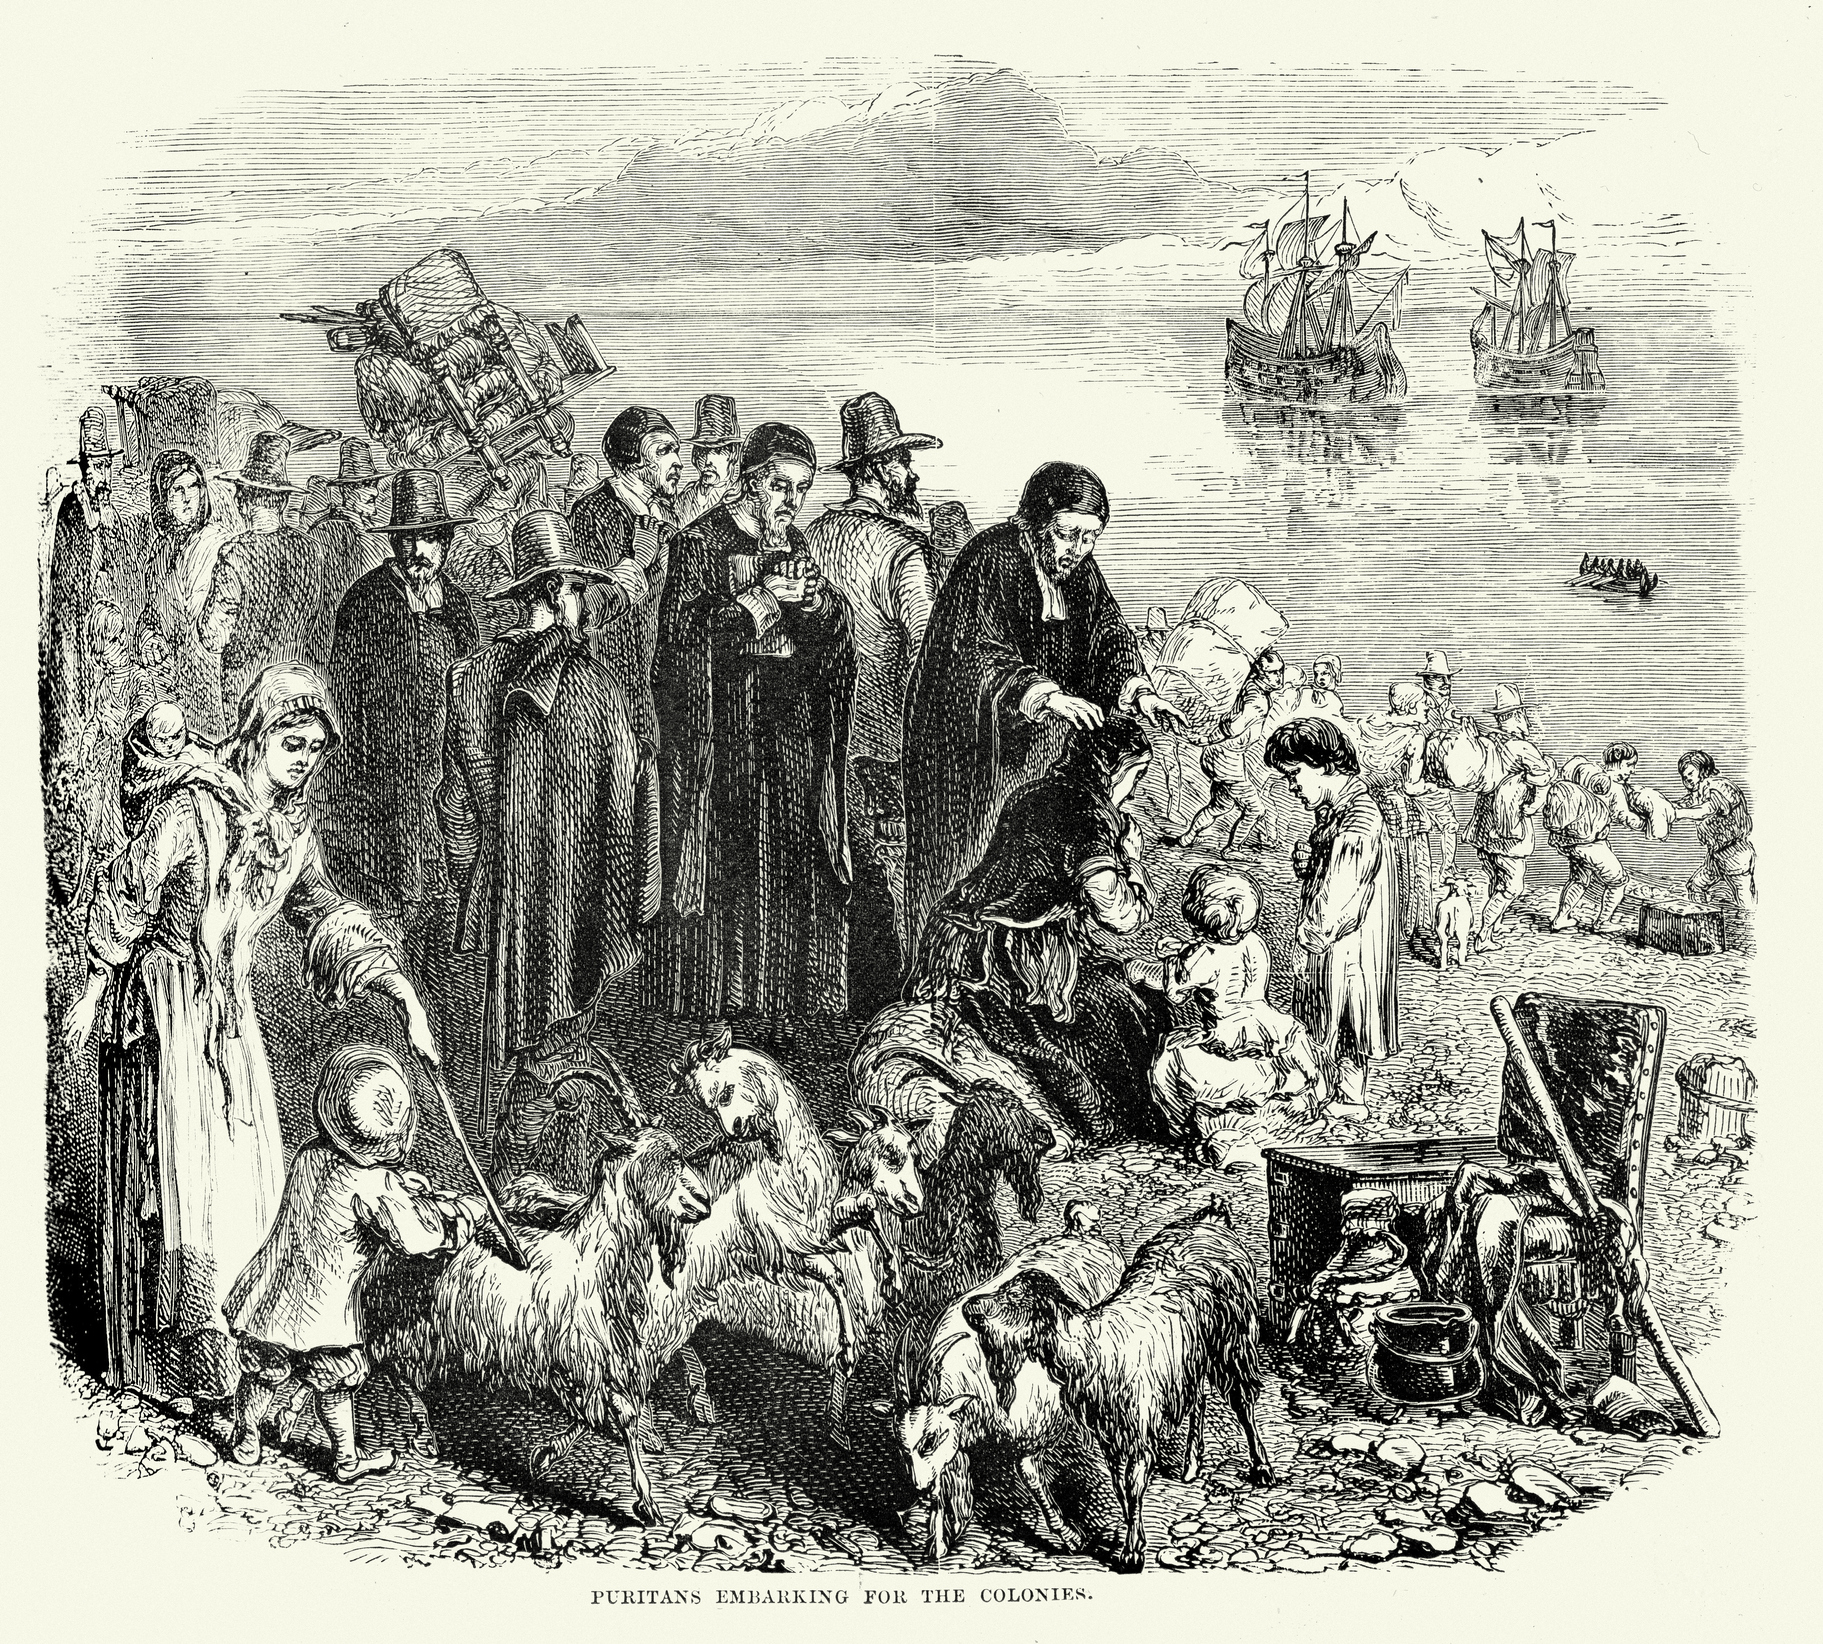 Puritans embarking for the Colonies